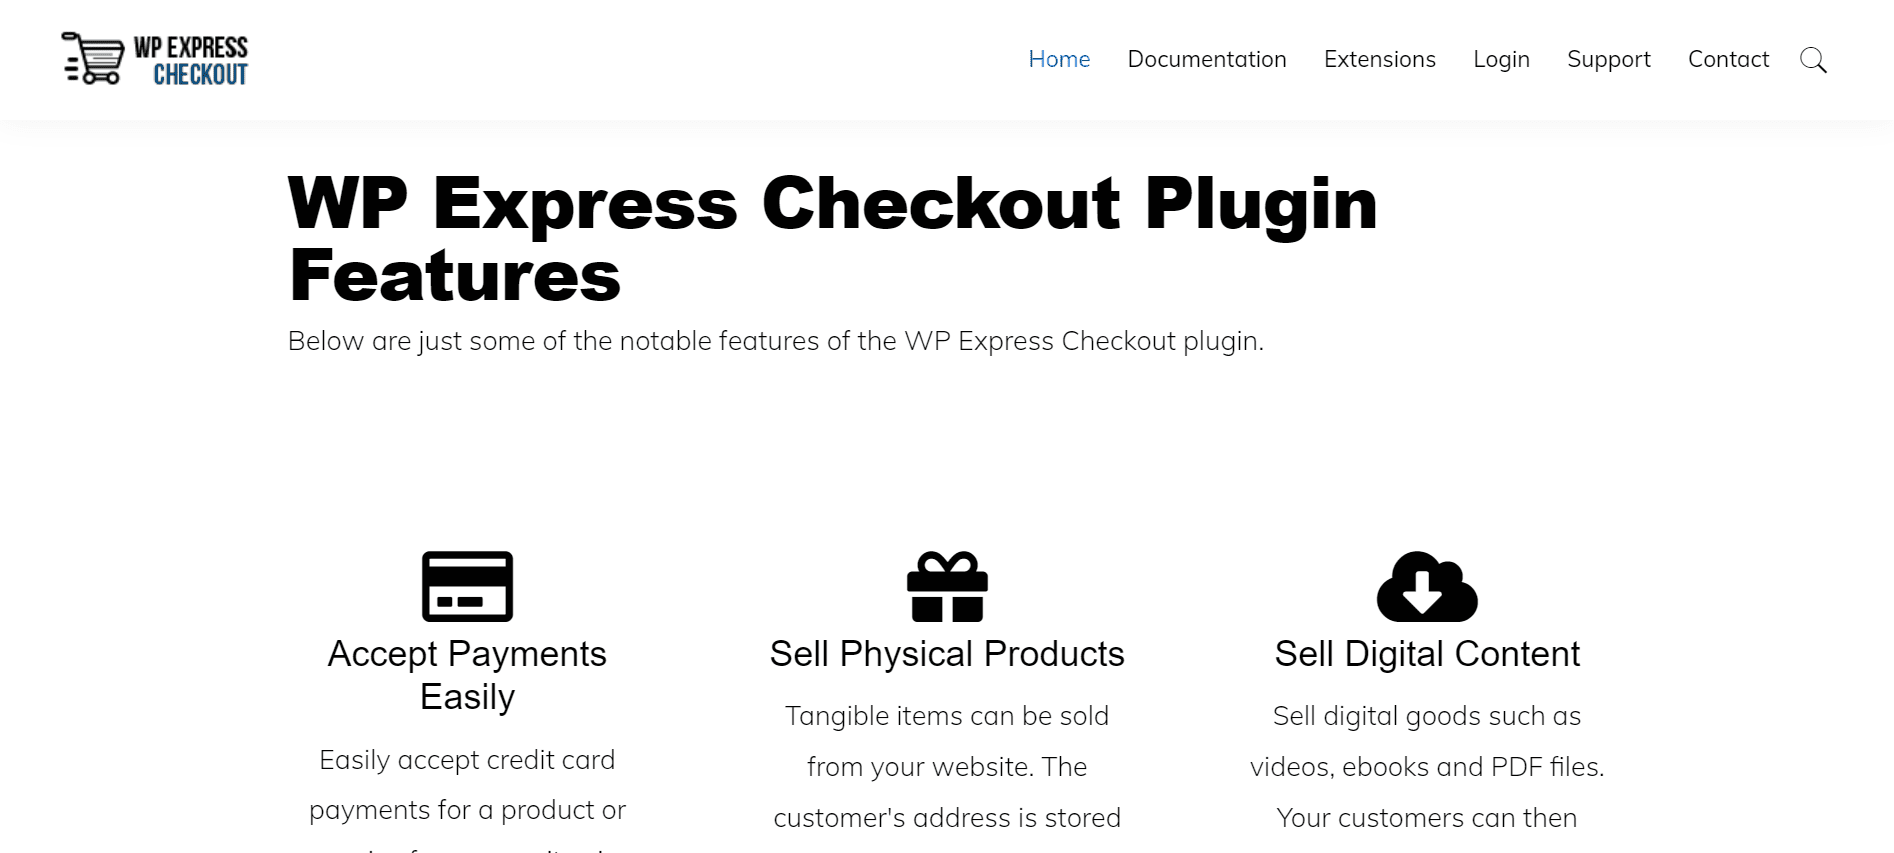 WP Express Checkout Plugin Features